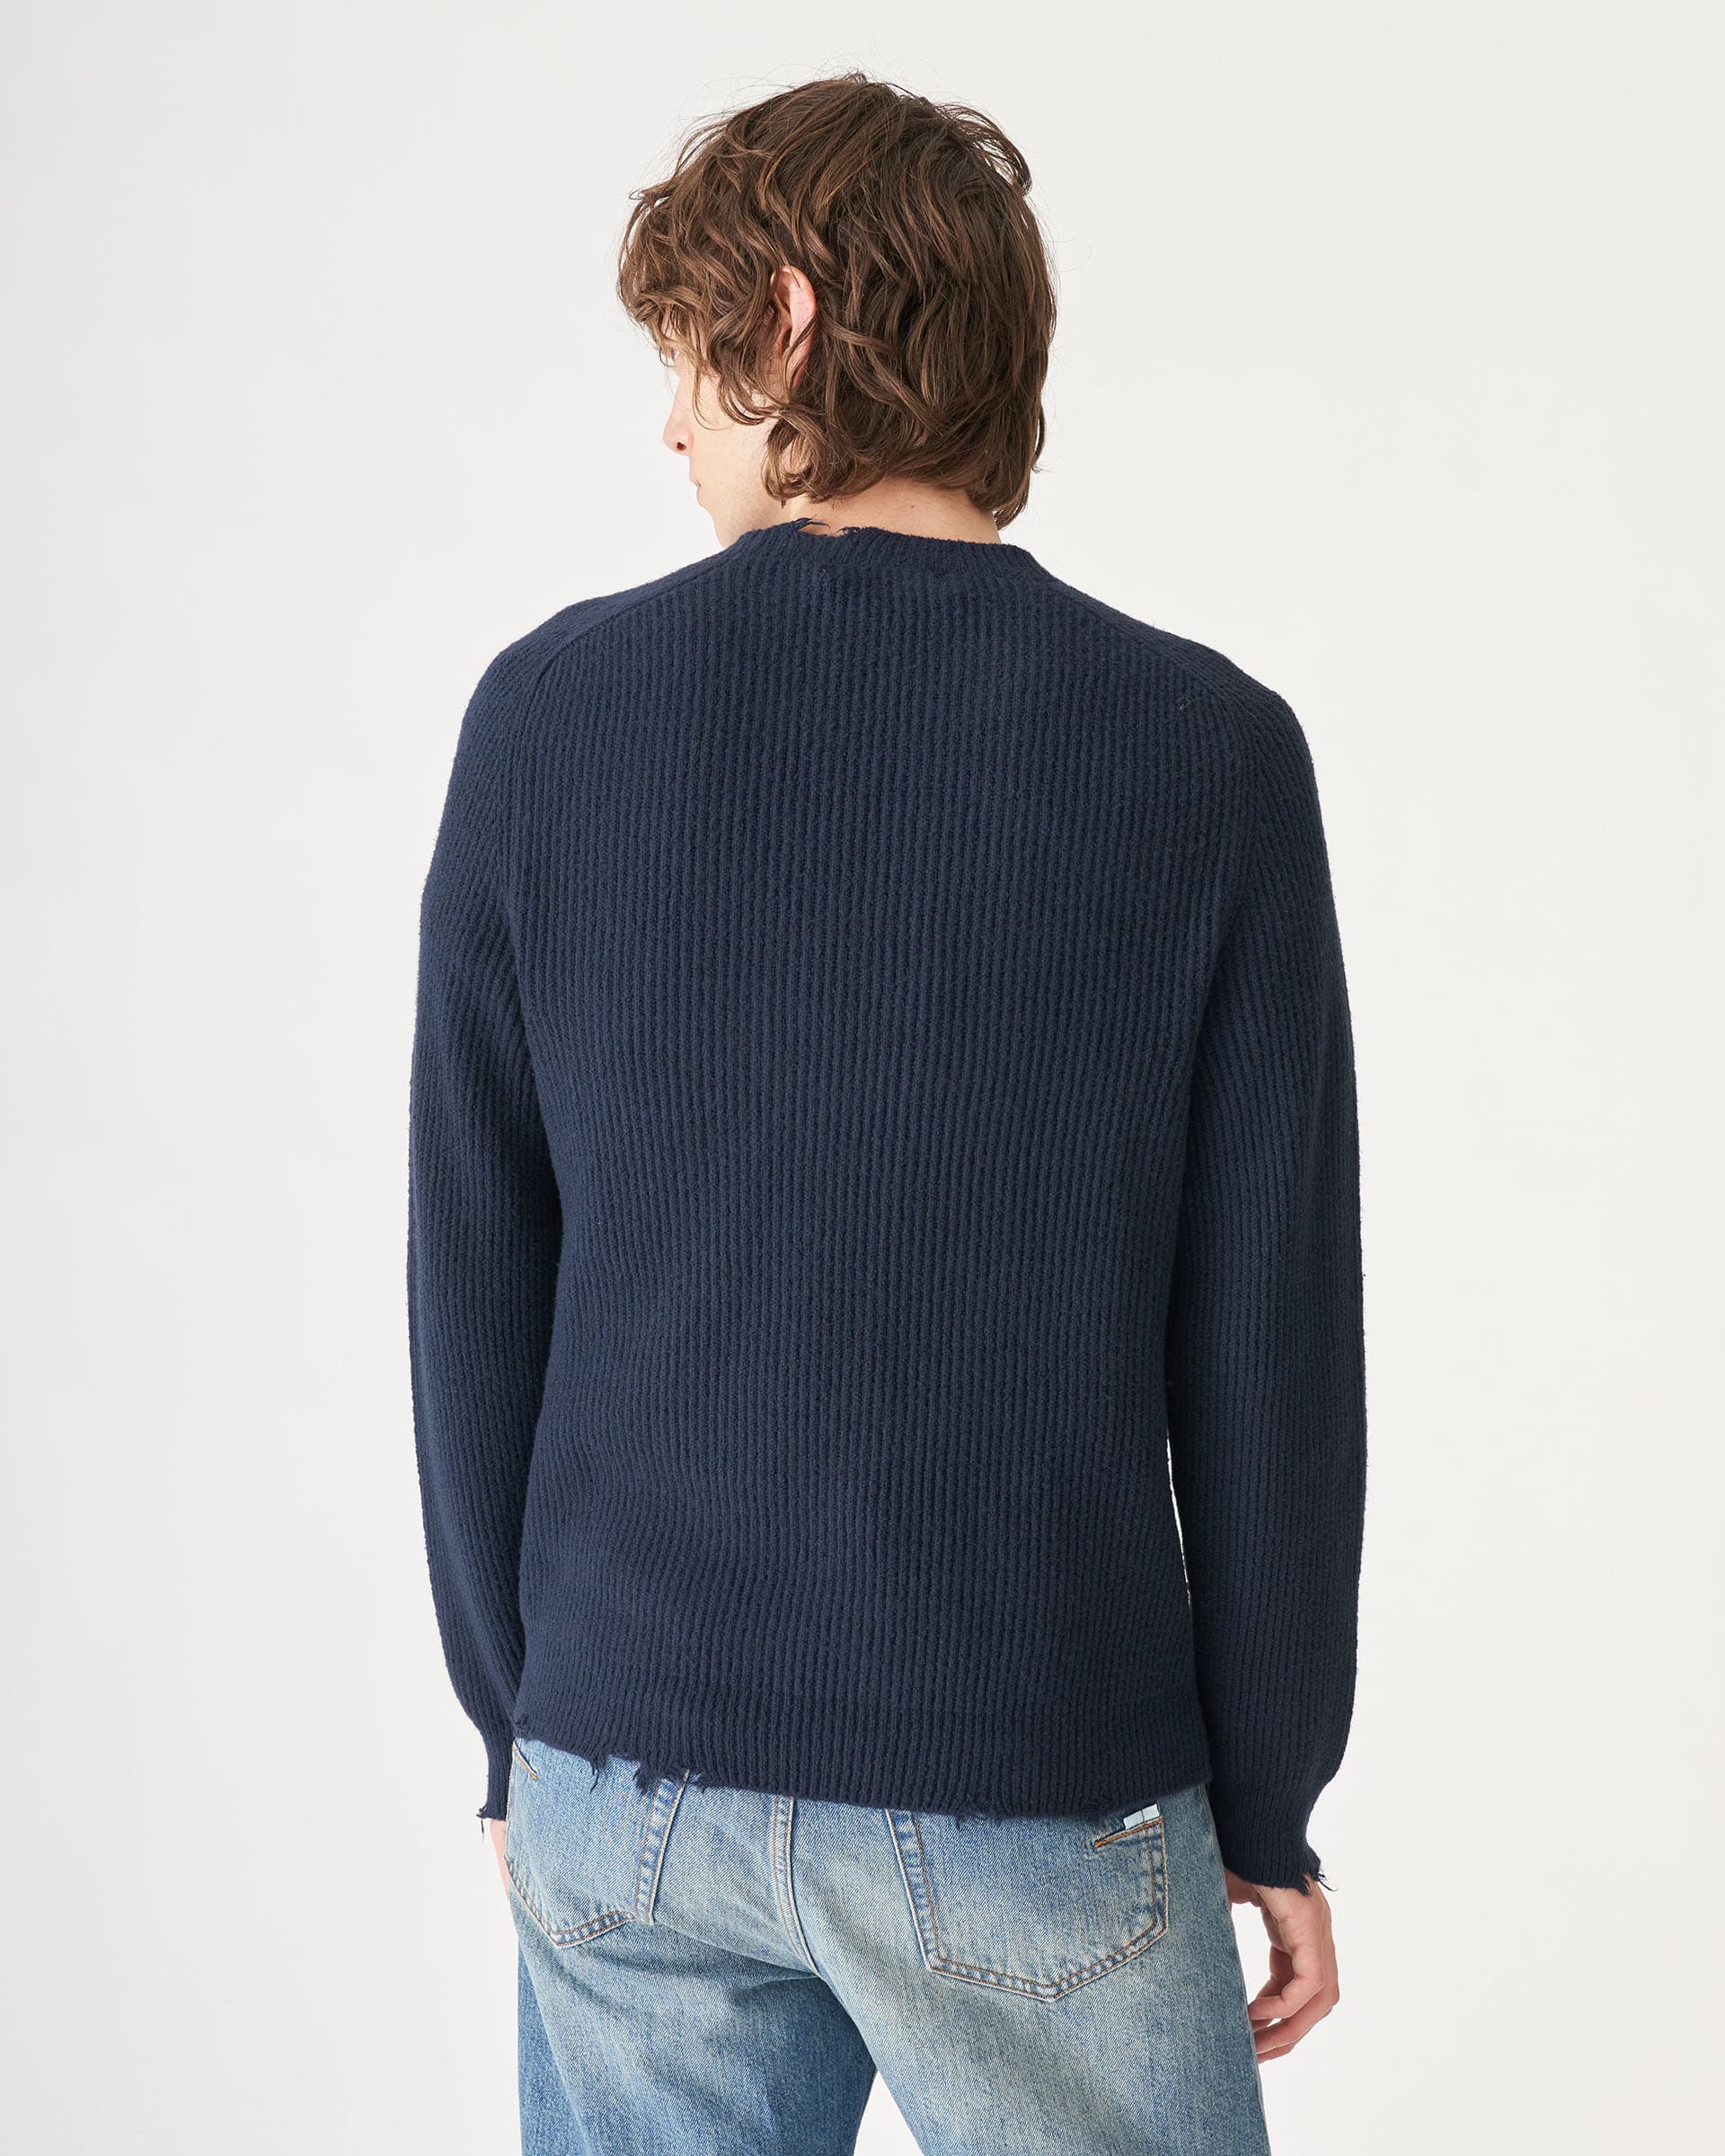 The Market Store | English Rib Neck With Breaks